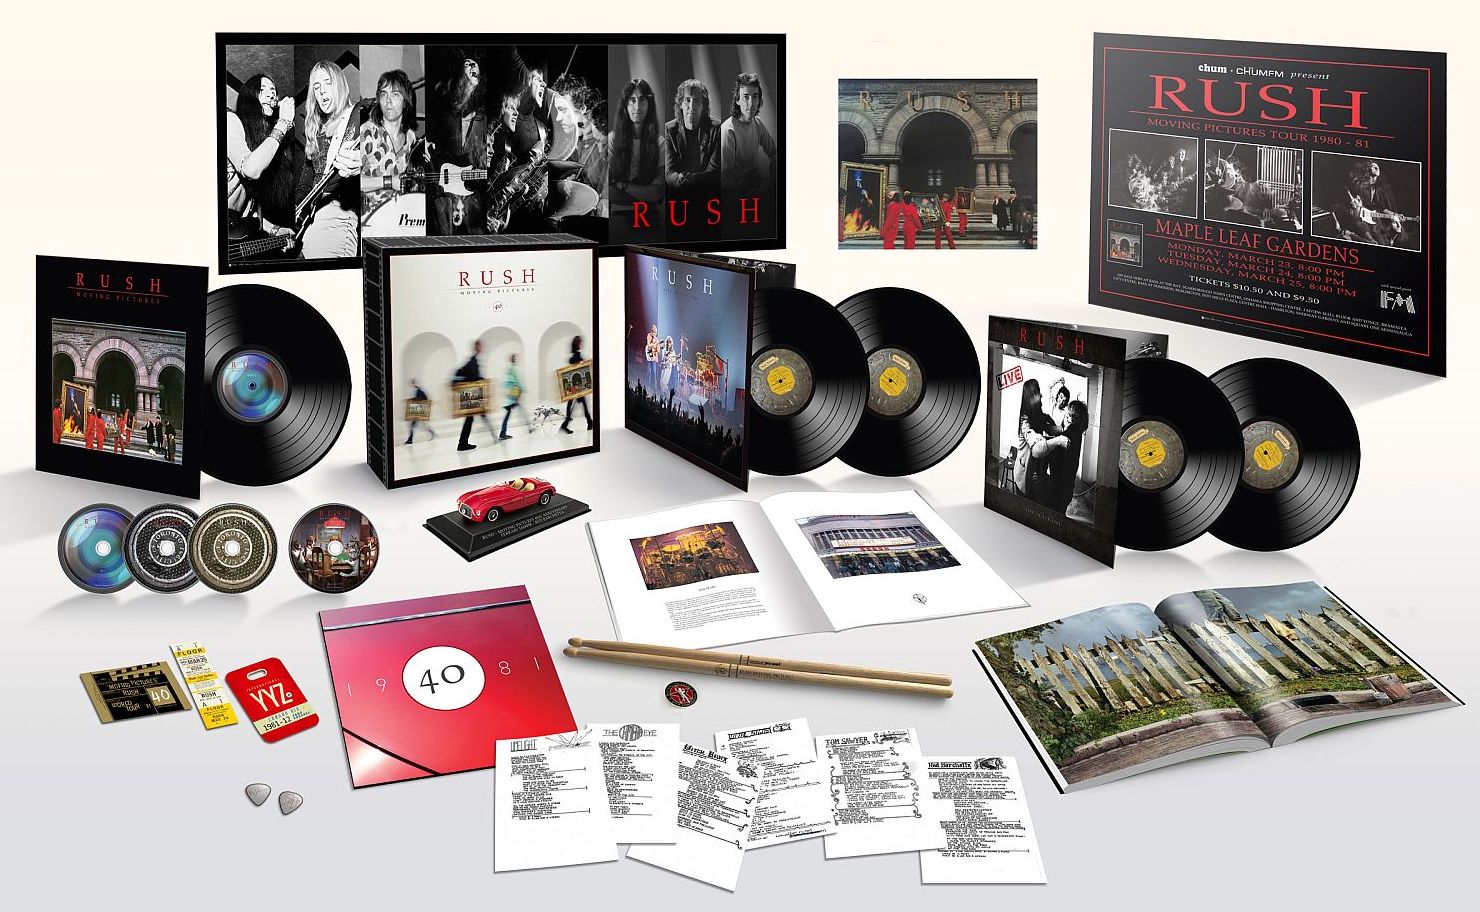 Rush is a Band Blog: Rush Moving Pictures 40th anniversary box set